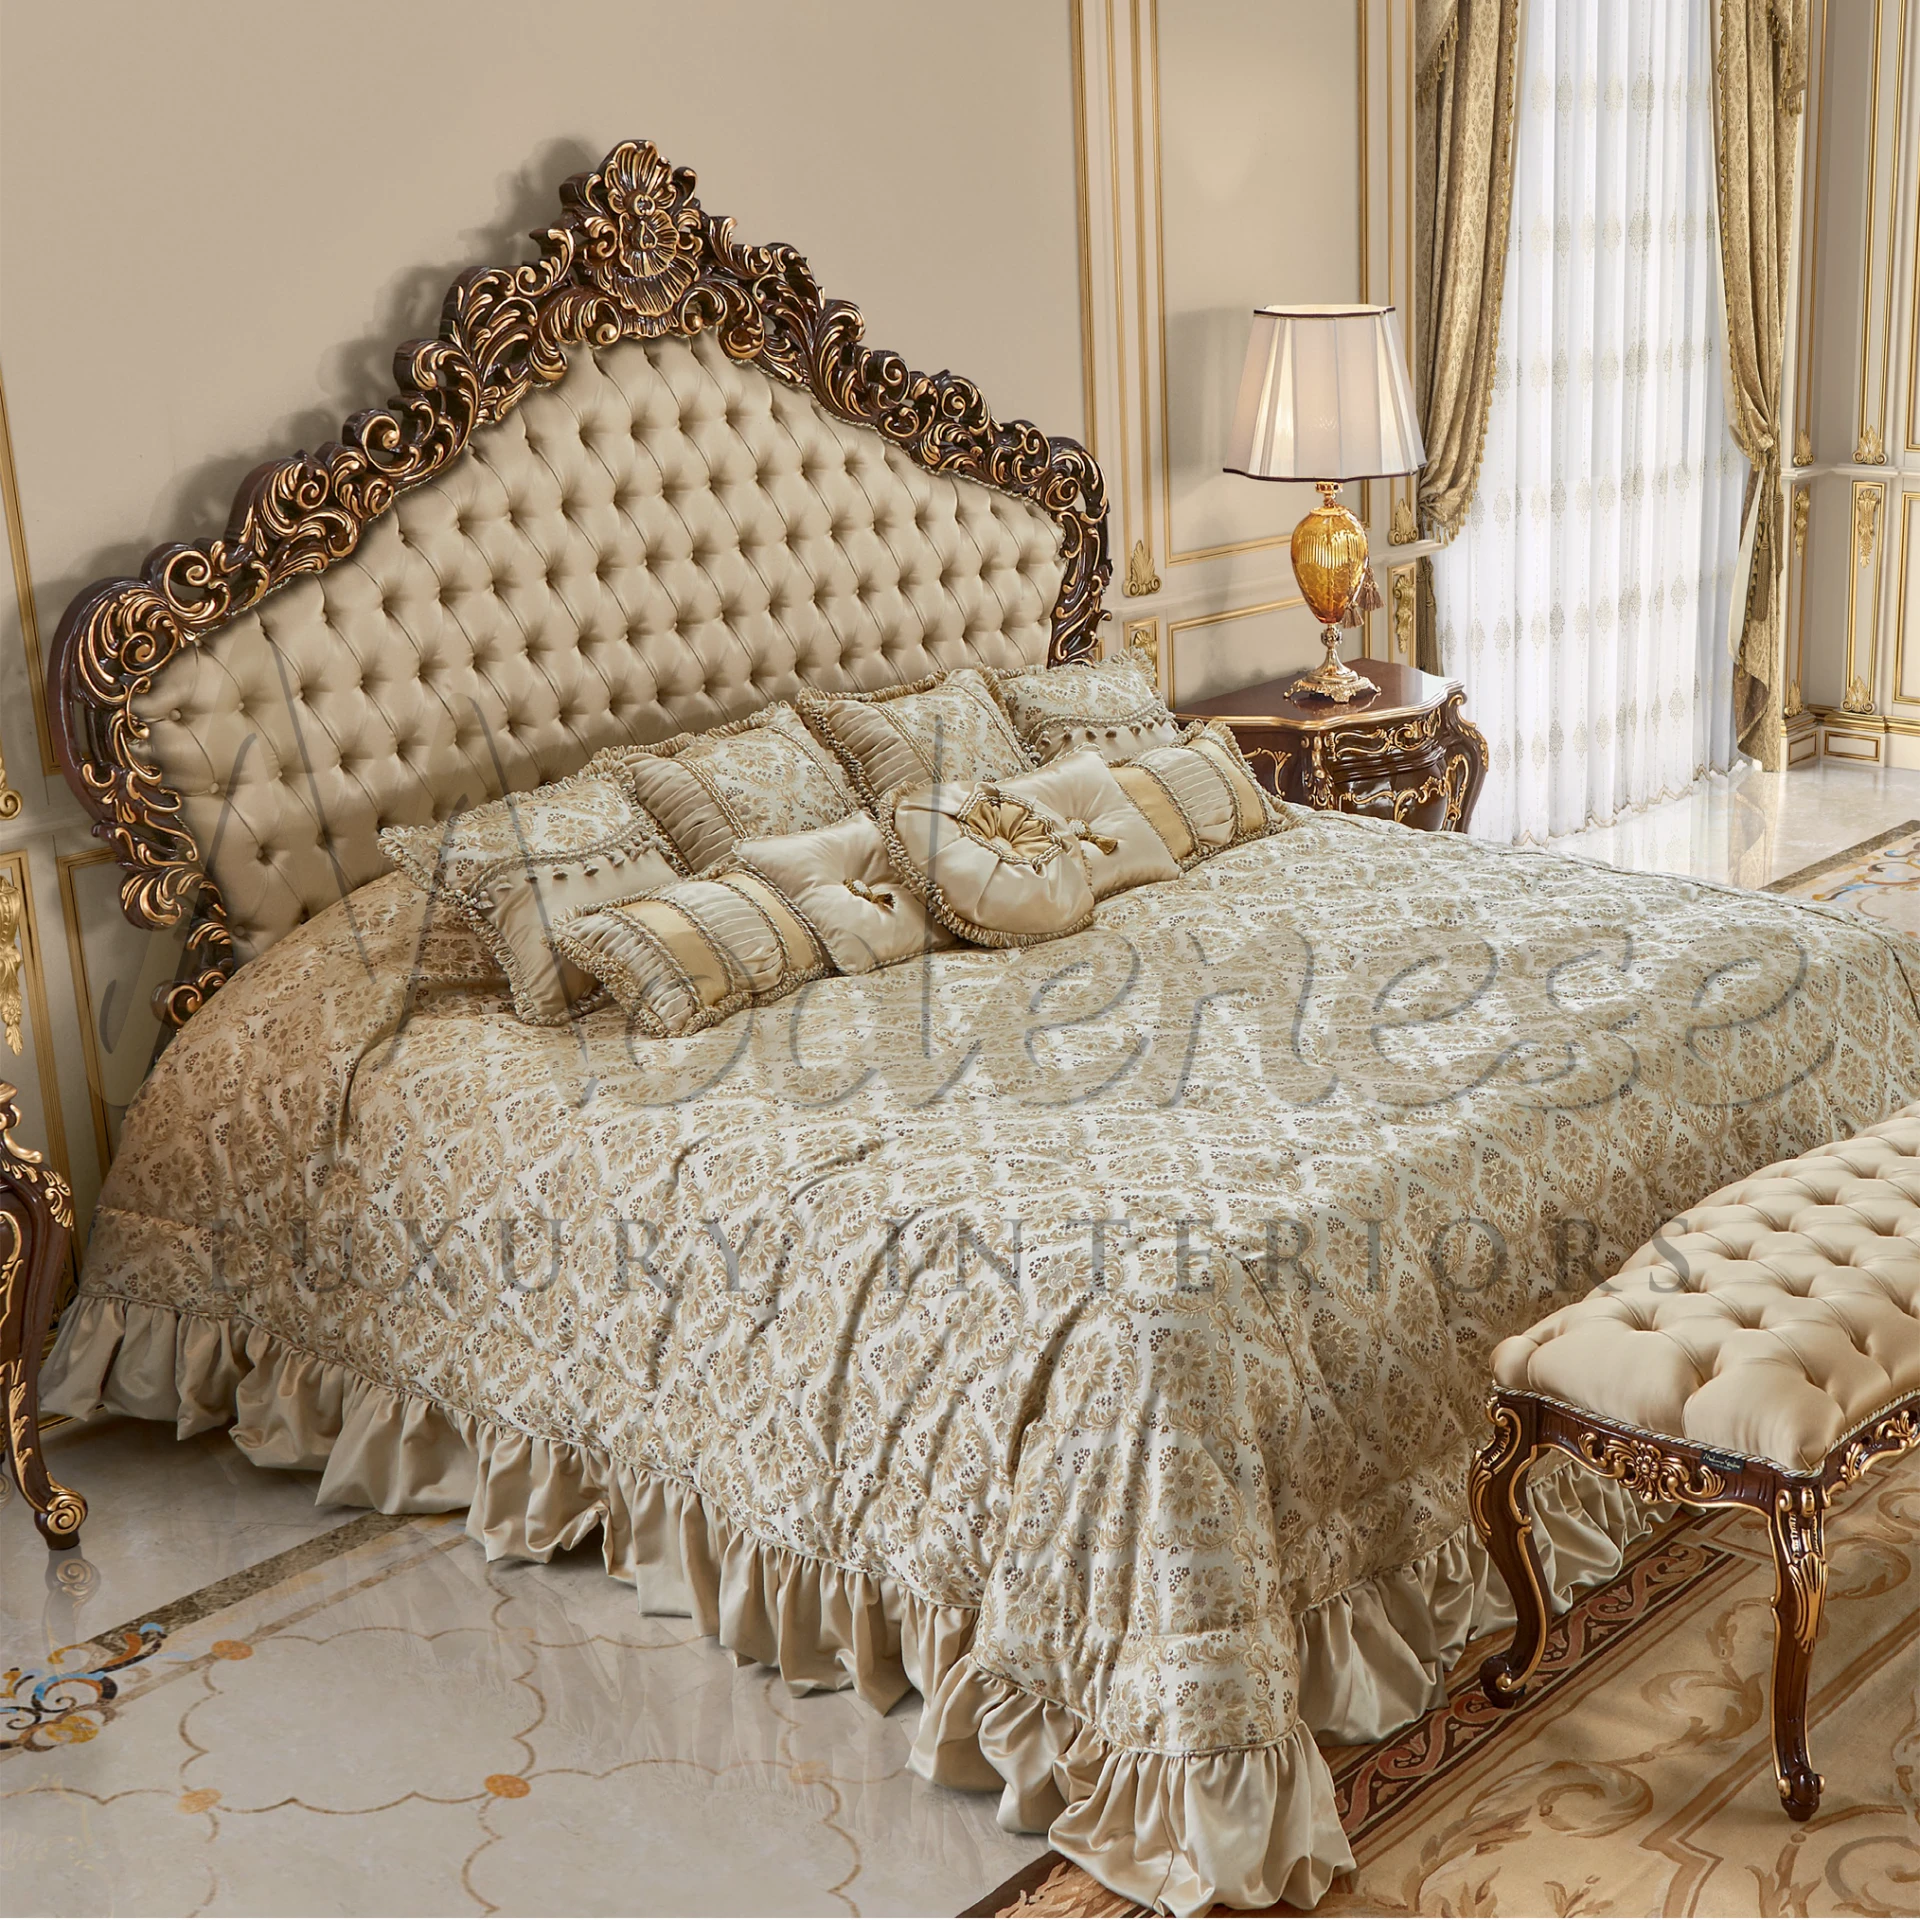 Classic bed featuring the Traditional Beige Pillow, embodying timeless beauty and enhancing the decor with its subtle charm.